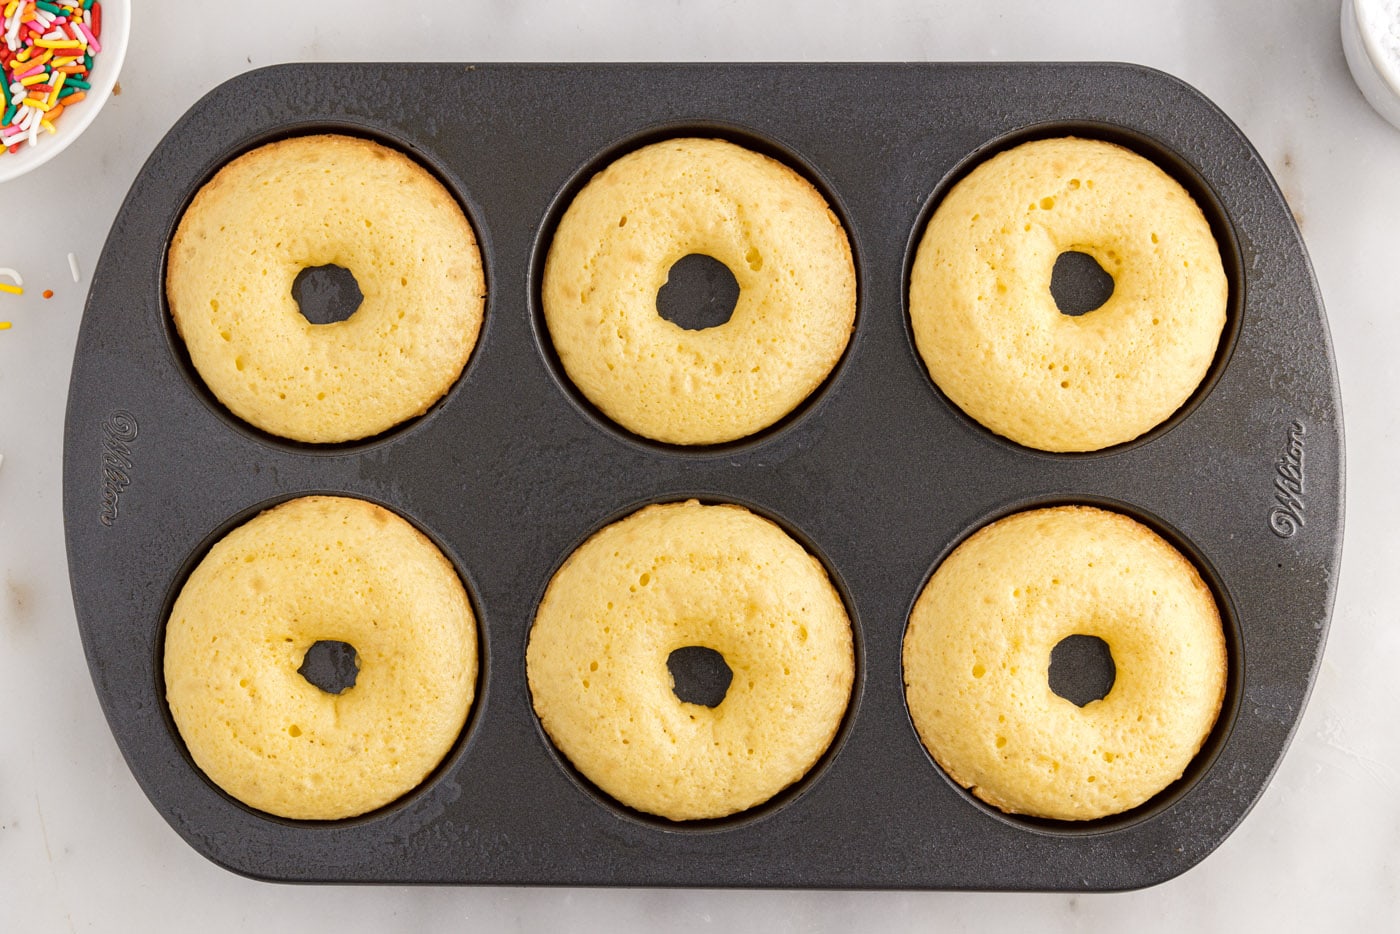 baked cake mix donuts in a pan